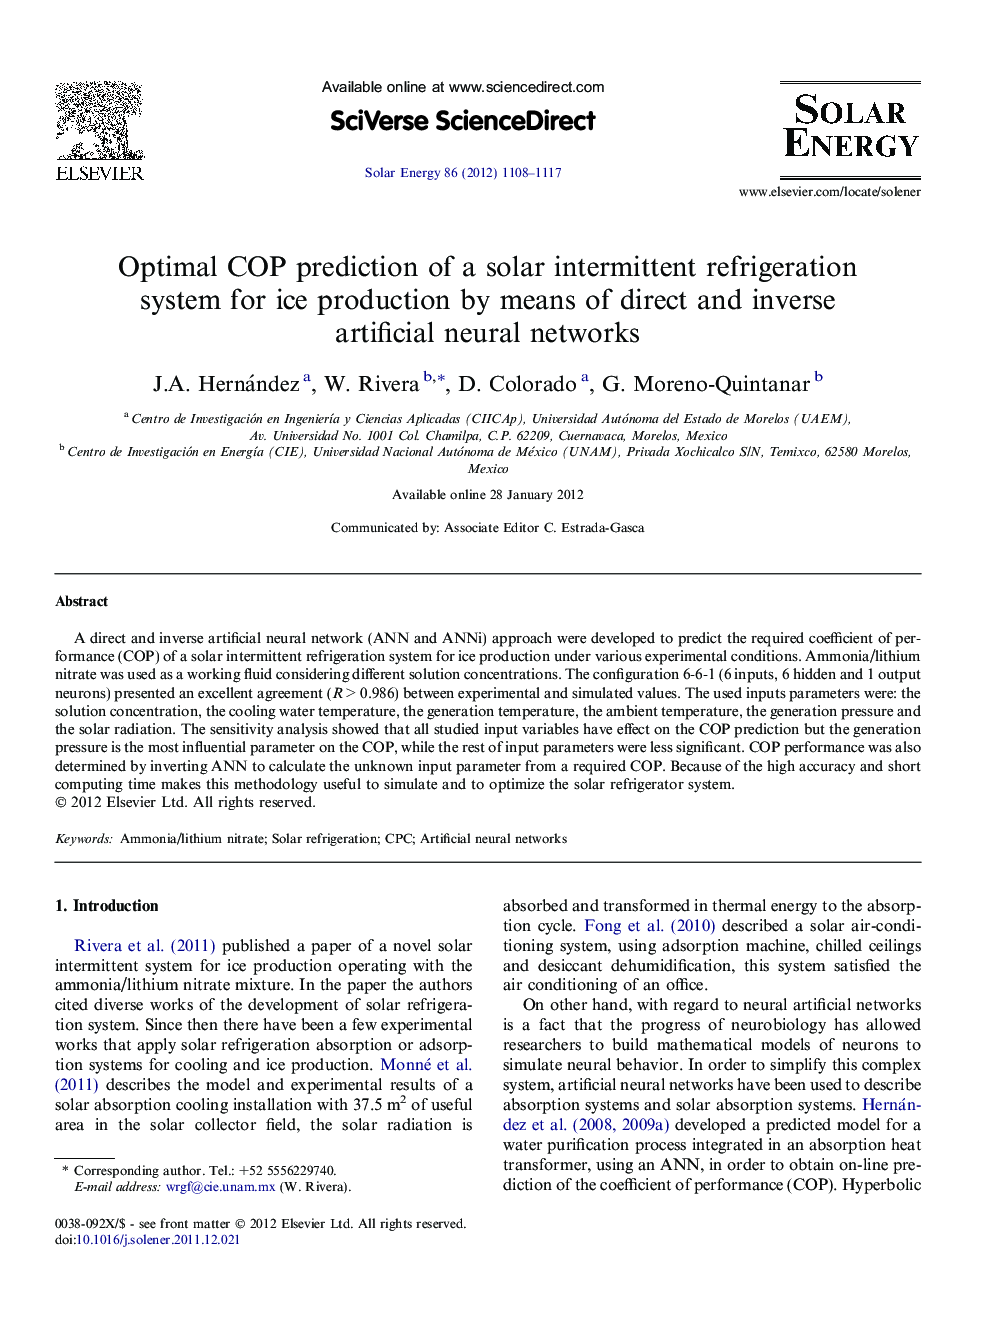 Optimal COP prediction of a solar intermittent refrigeration system for ice production by means of direct and inverse artificial neural networks